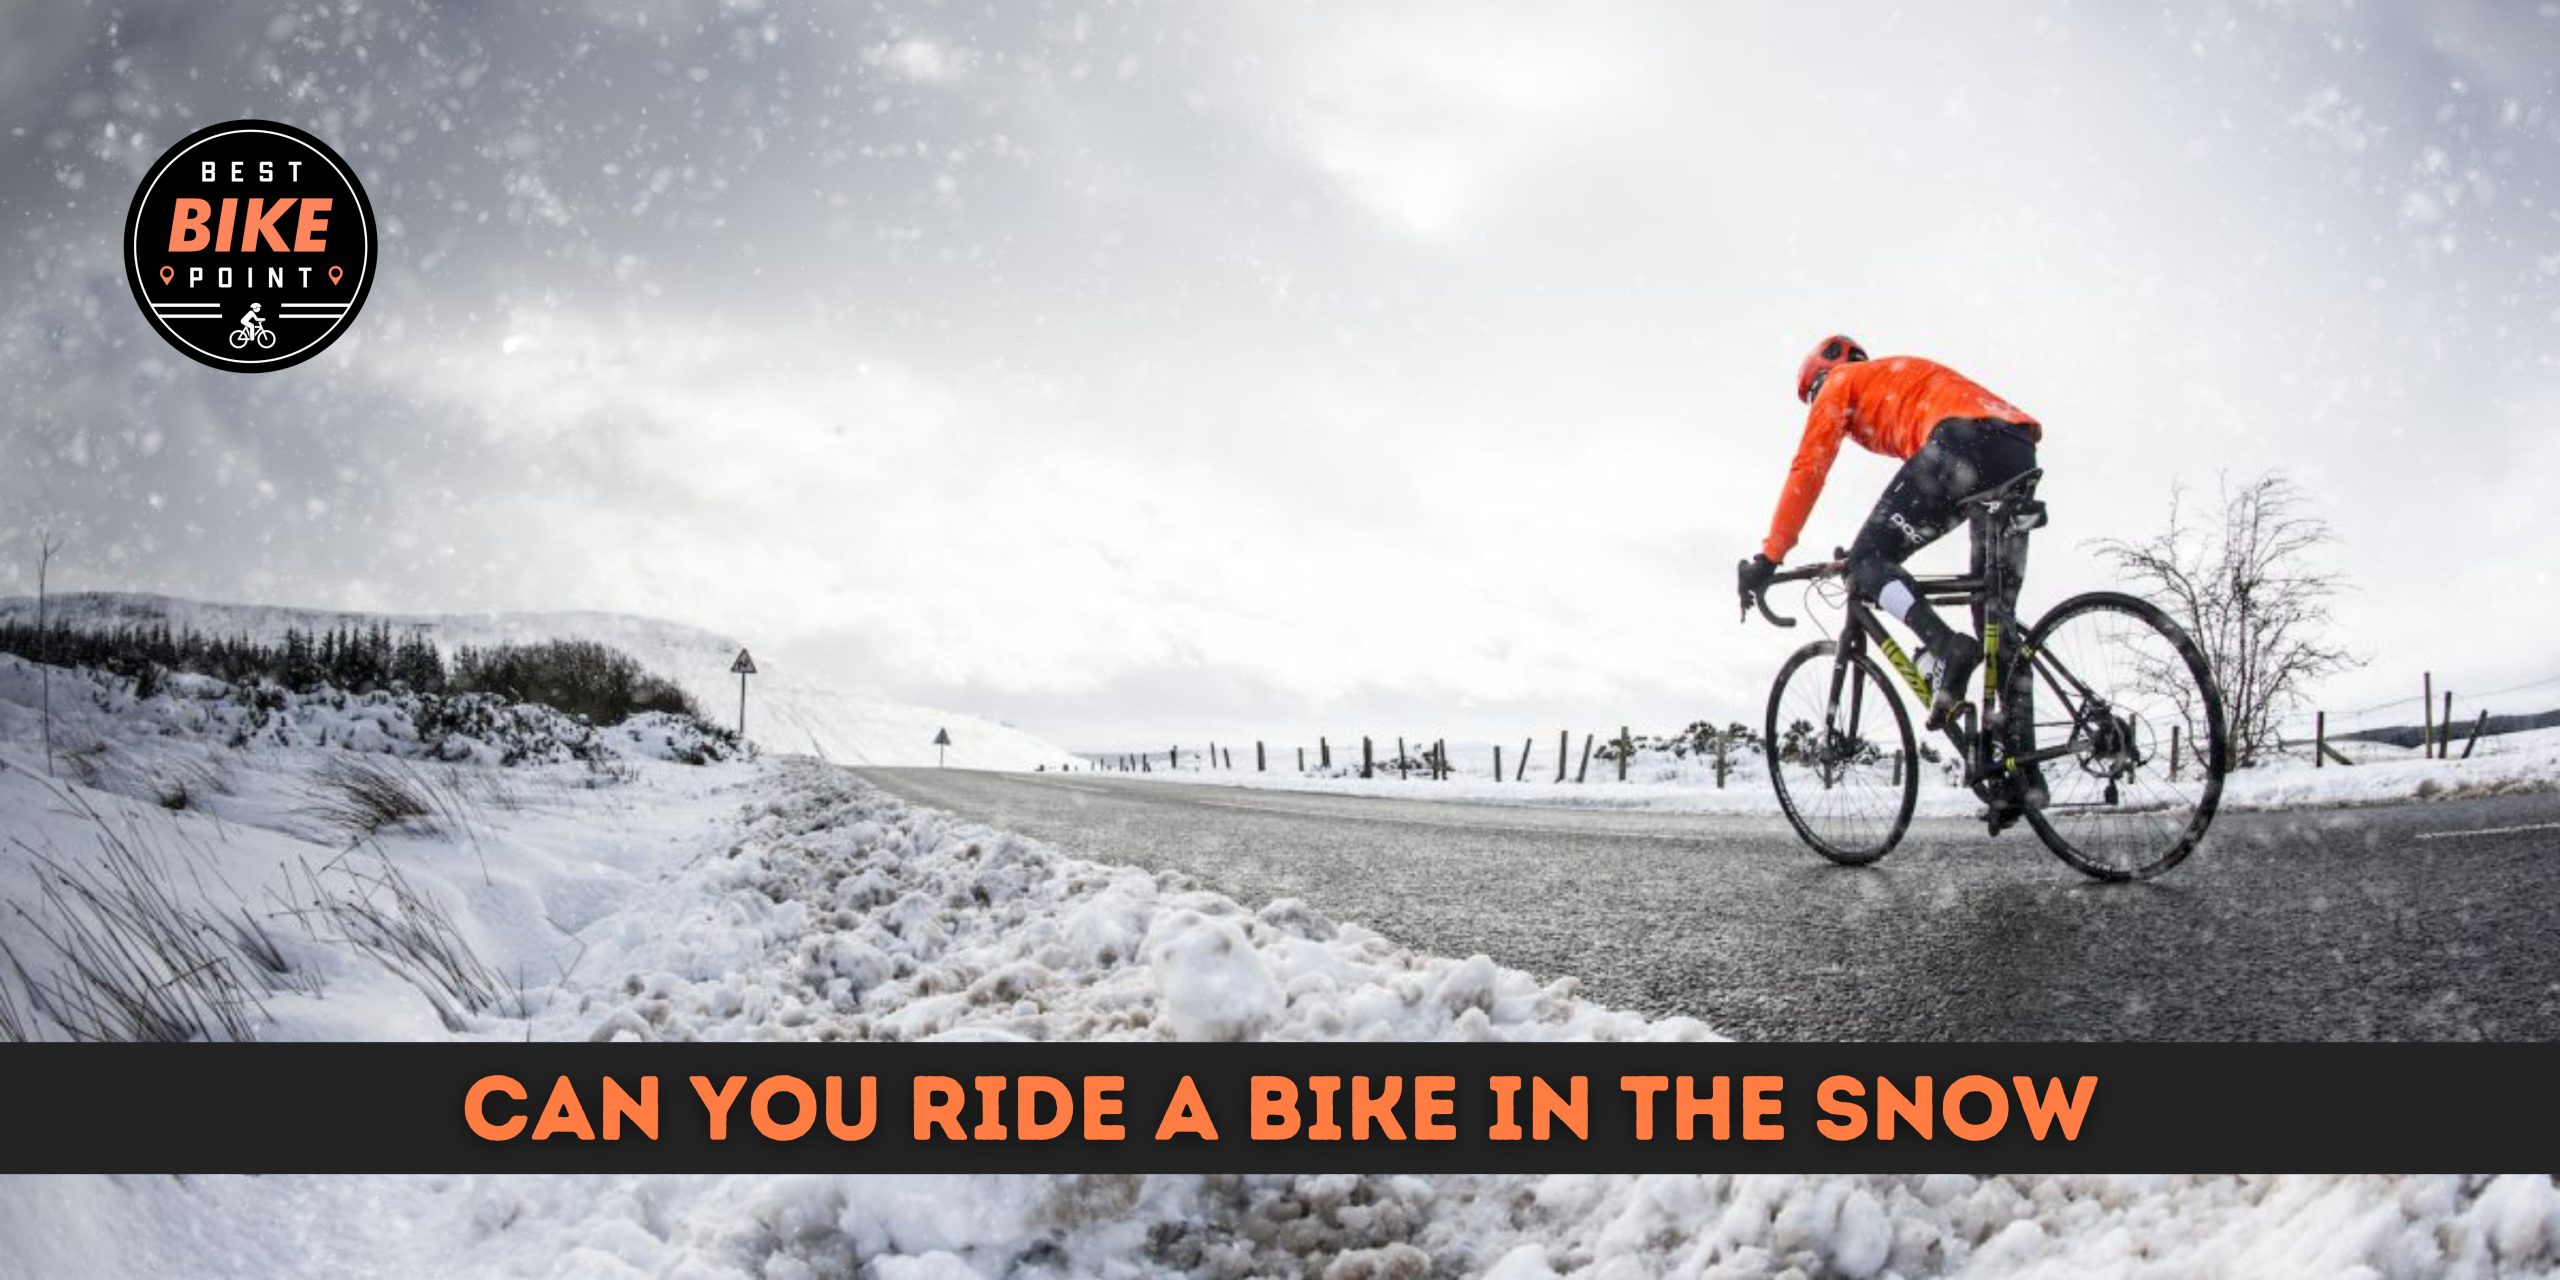 Can You Ride a Bike in the Snow?